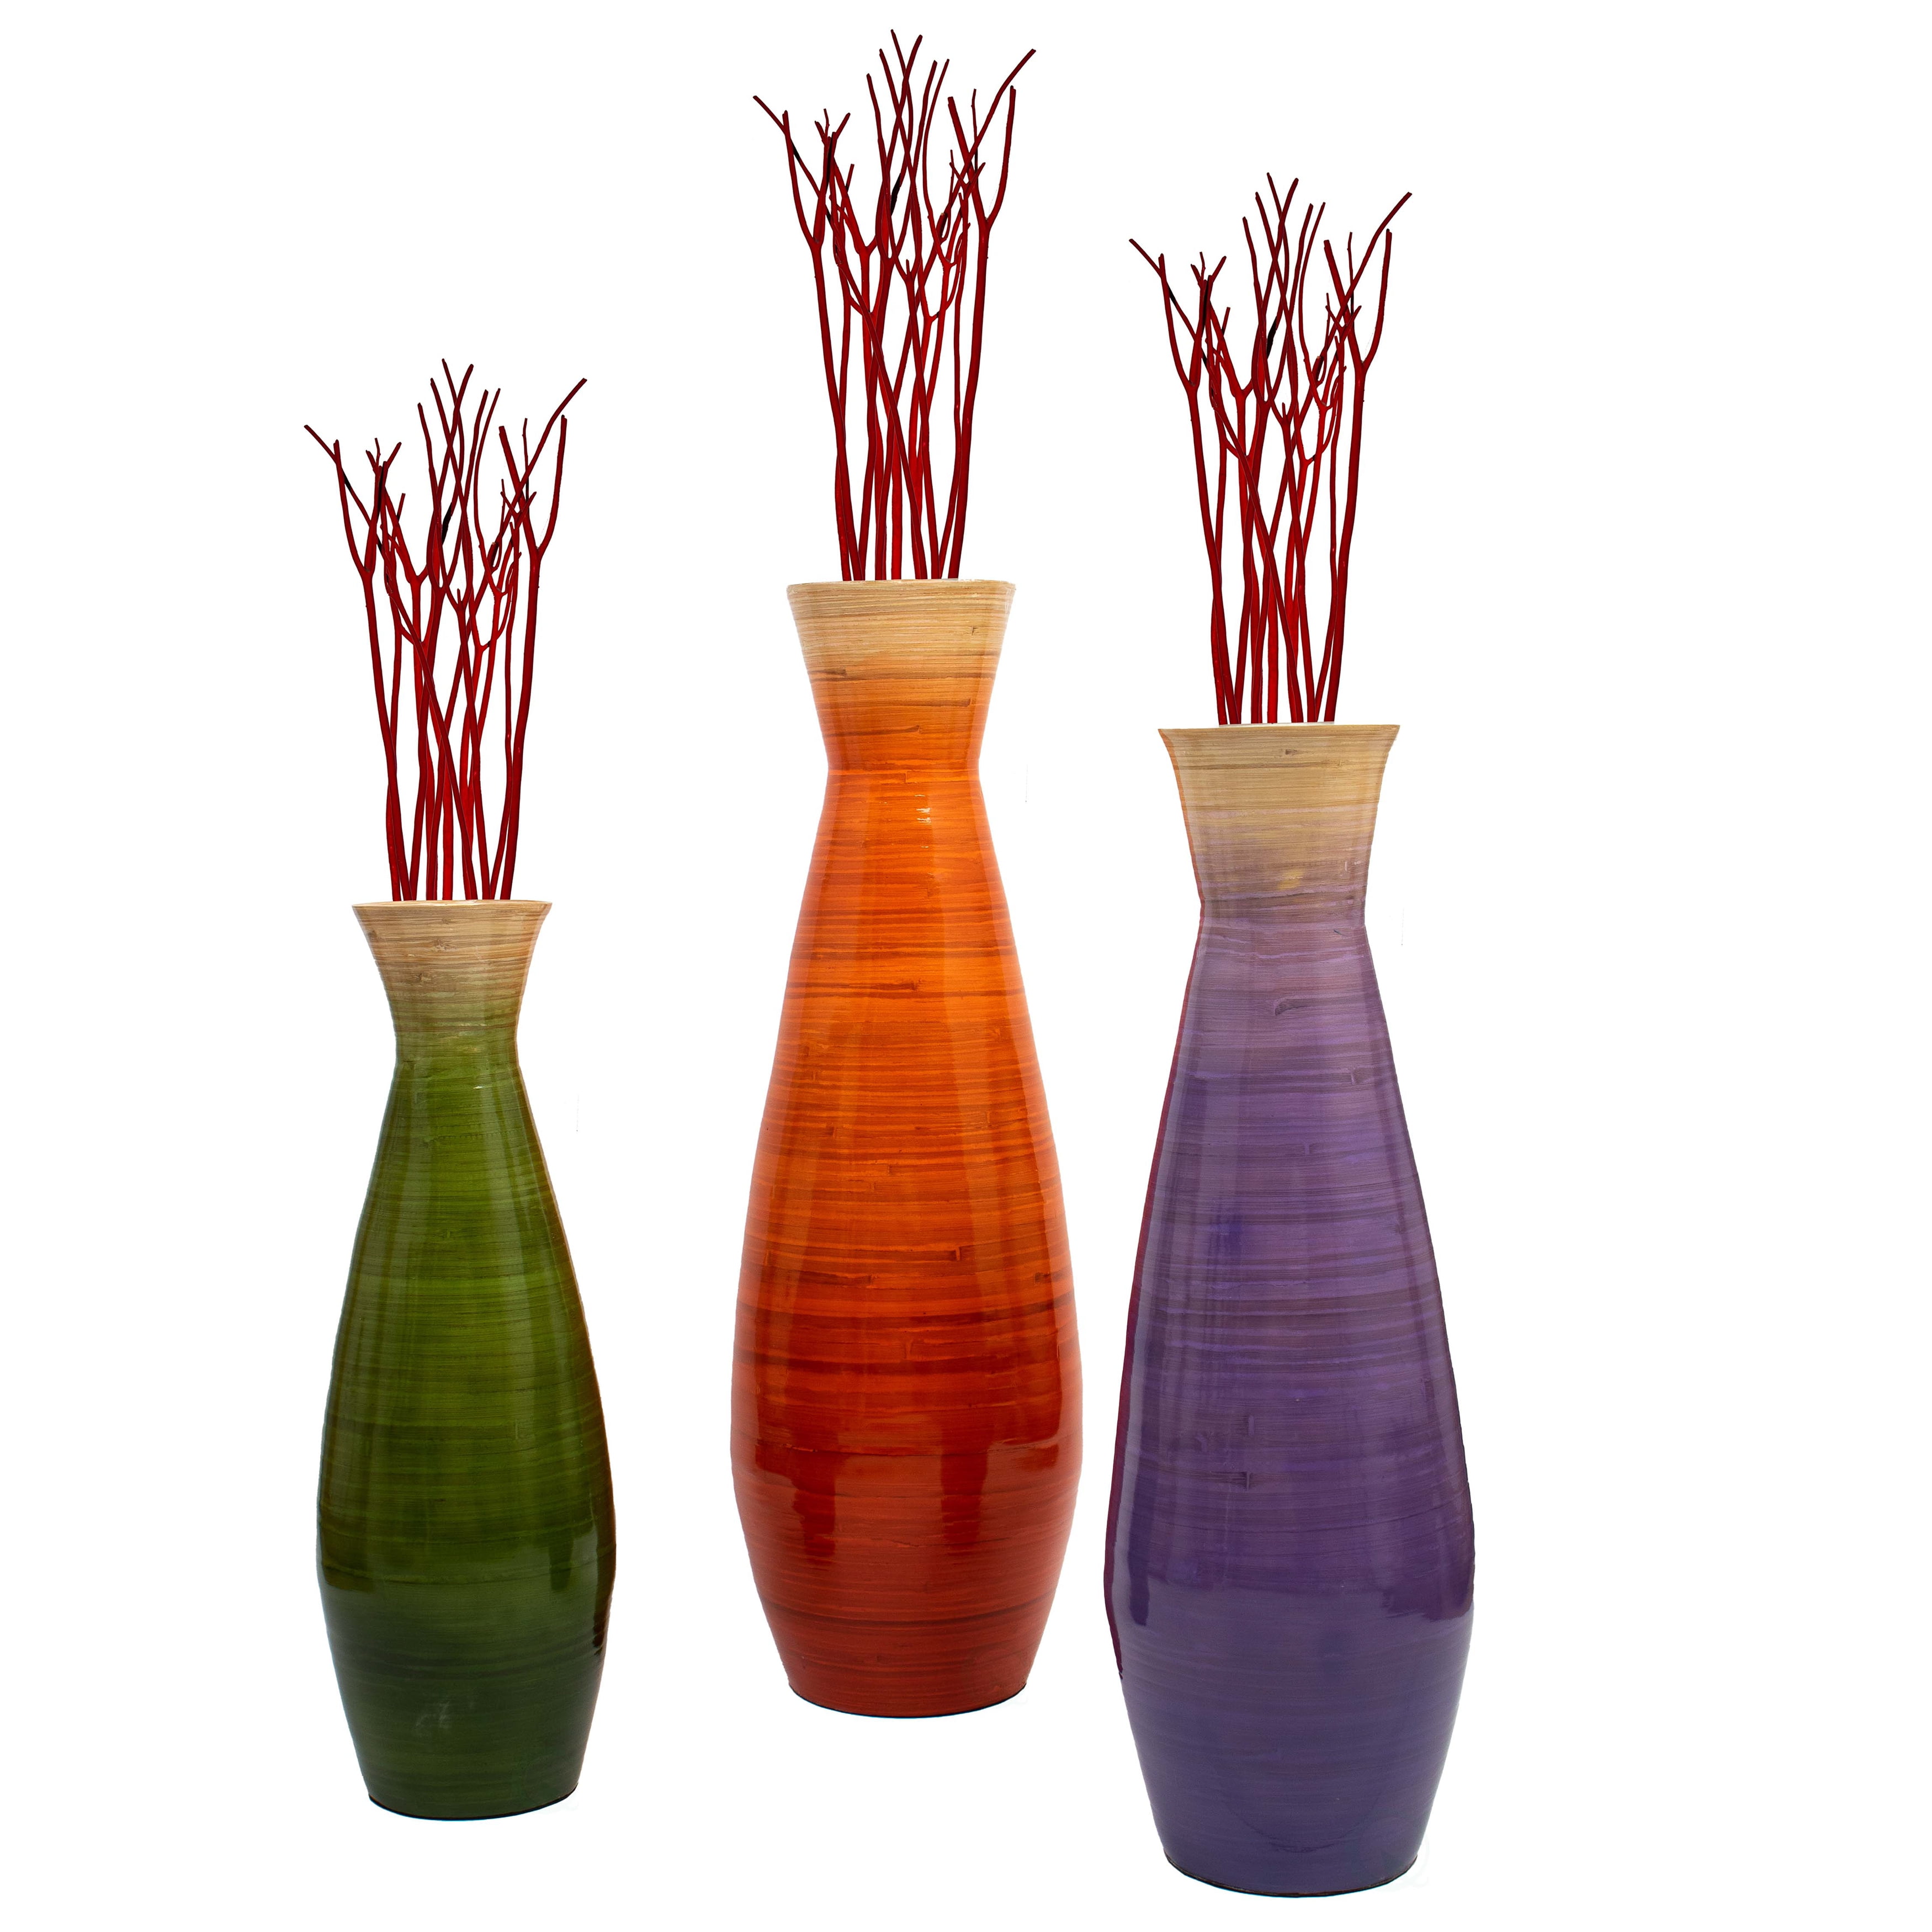 mudder Outlaw stempel Set of 3 Classic Bamboo Floor Vase Handmade, For Dining, Living Room,  Entryway, Fill Up With Dried Branches Or Flowers - Walmart.com